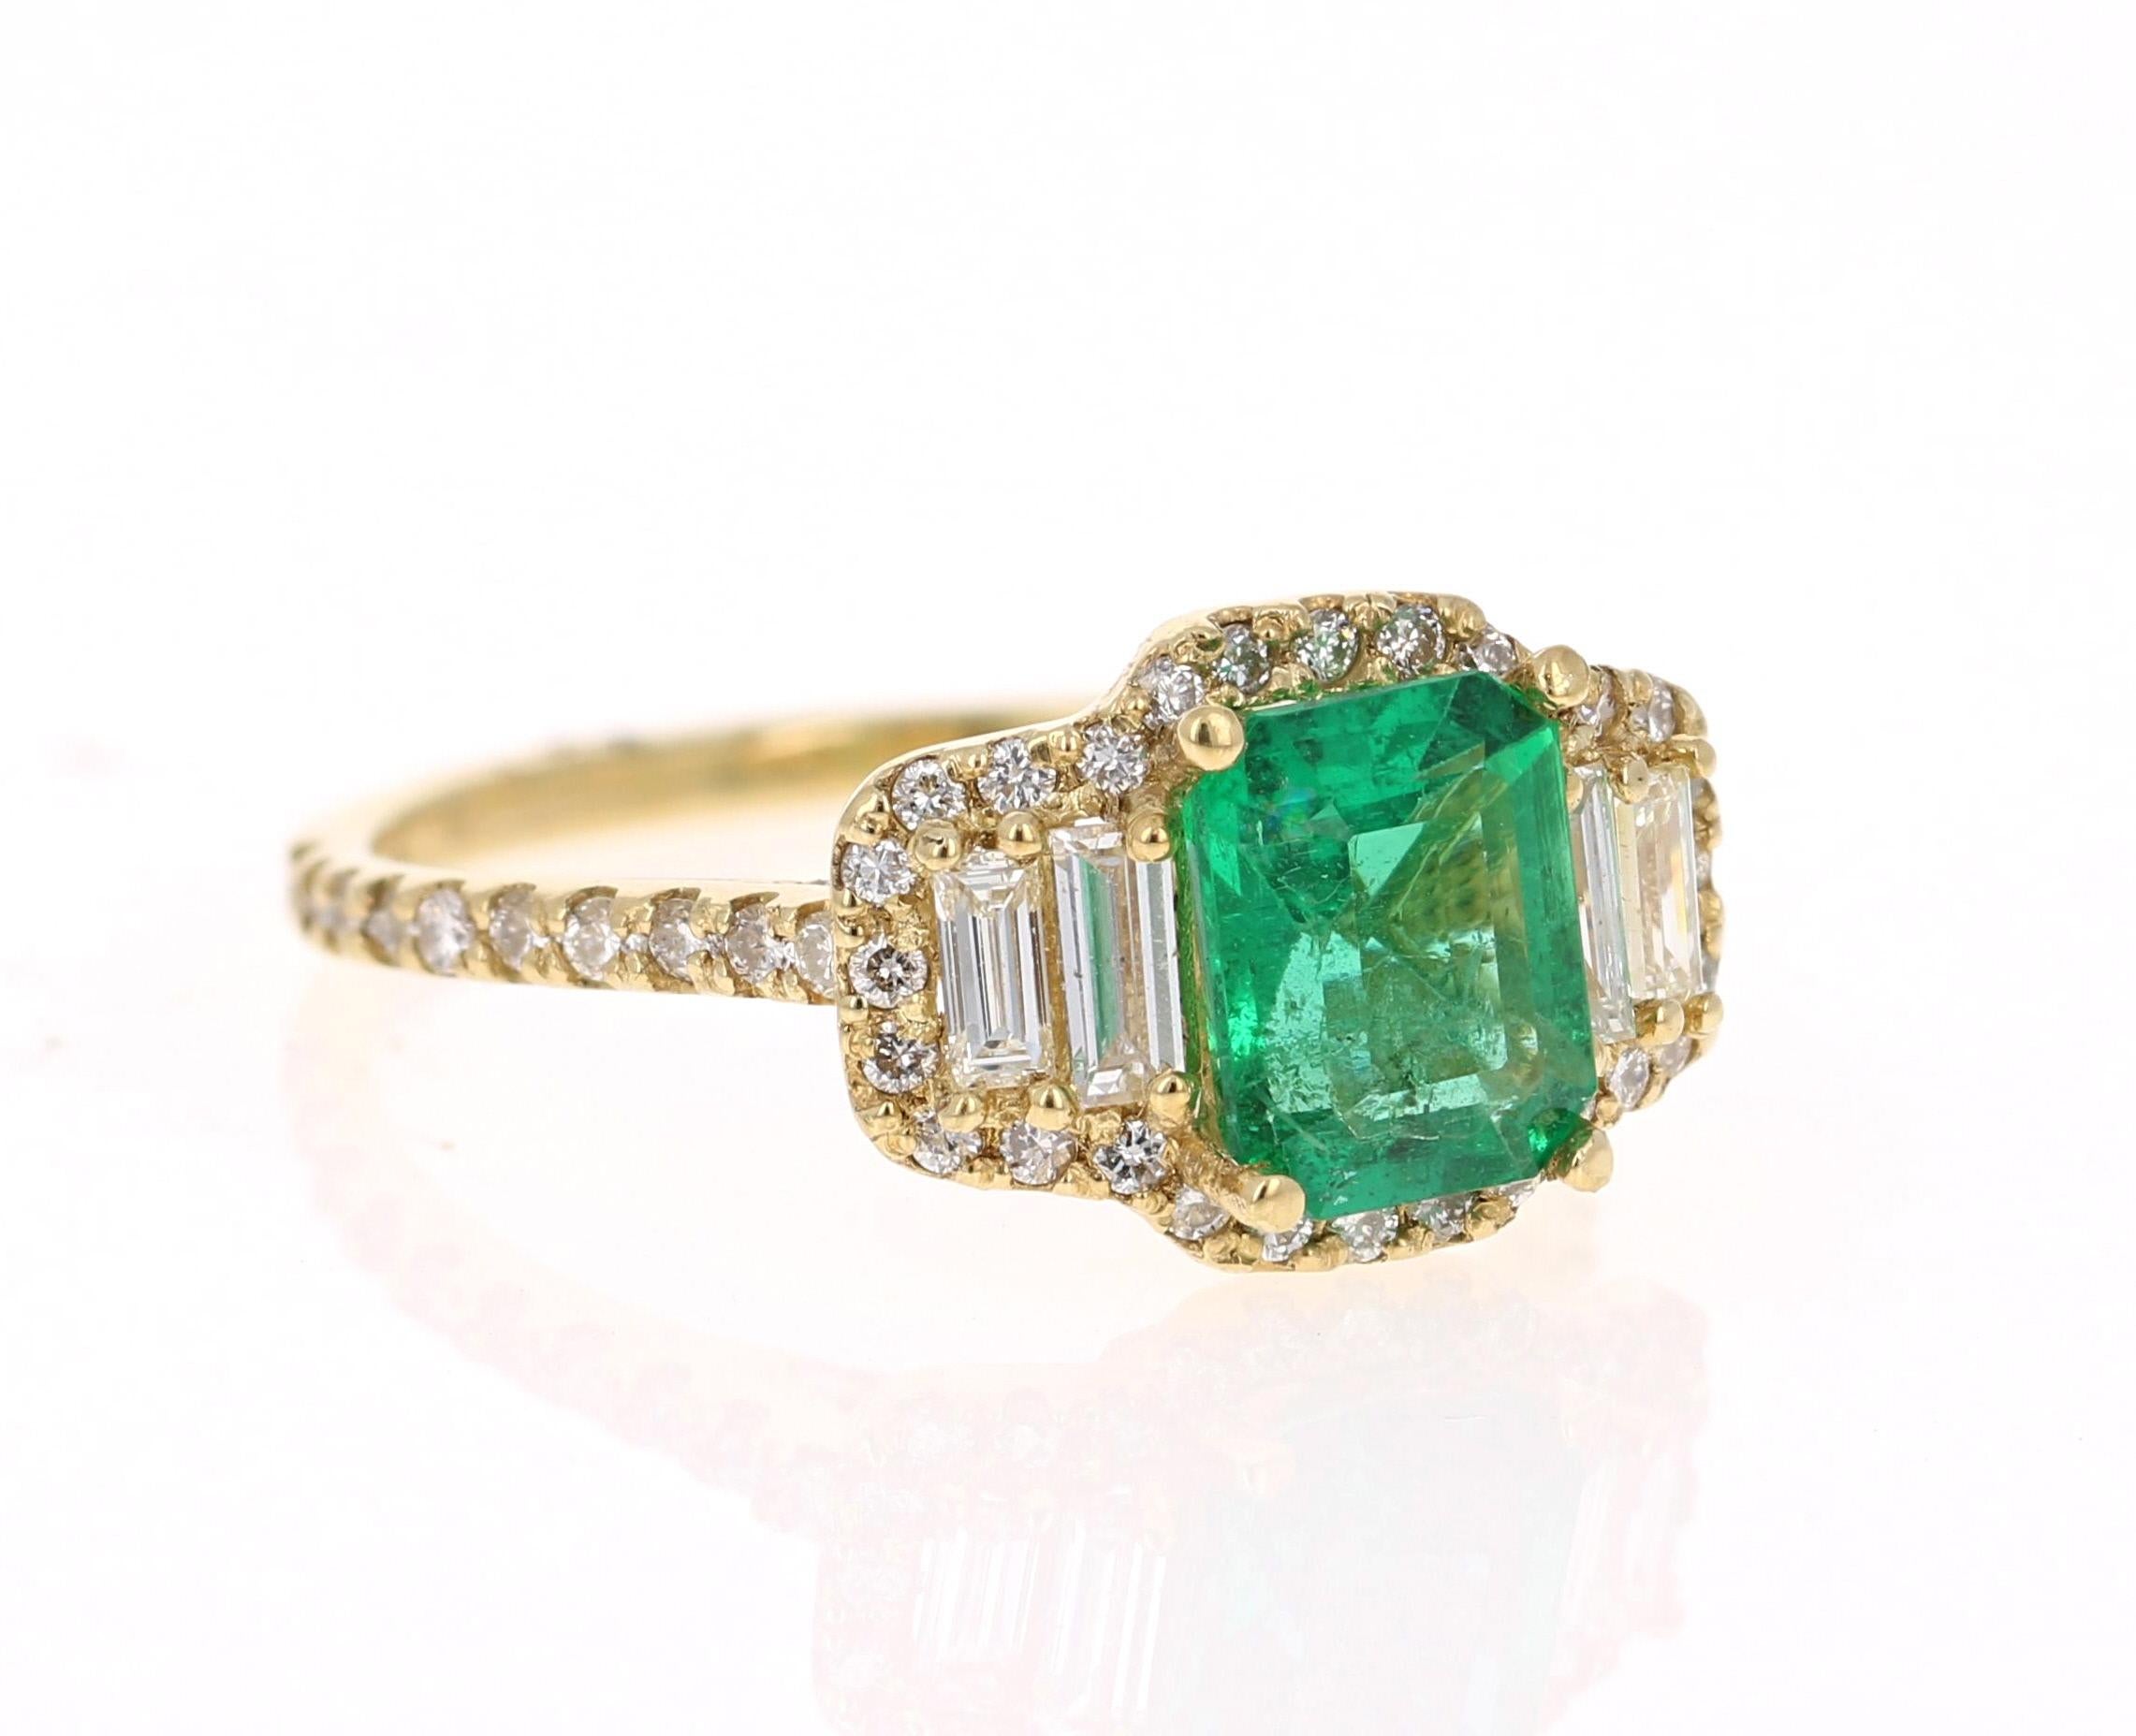 A beauty that is sure to be nothing less than a statement! 

This ring has a magnificently beautiful Emerald-Square Cut Green Emerald that weighs 1.38 Carats and has 4 Baguette Cut Diamonds weighing 0.30 Carats. It is further embellished with 88